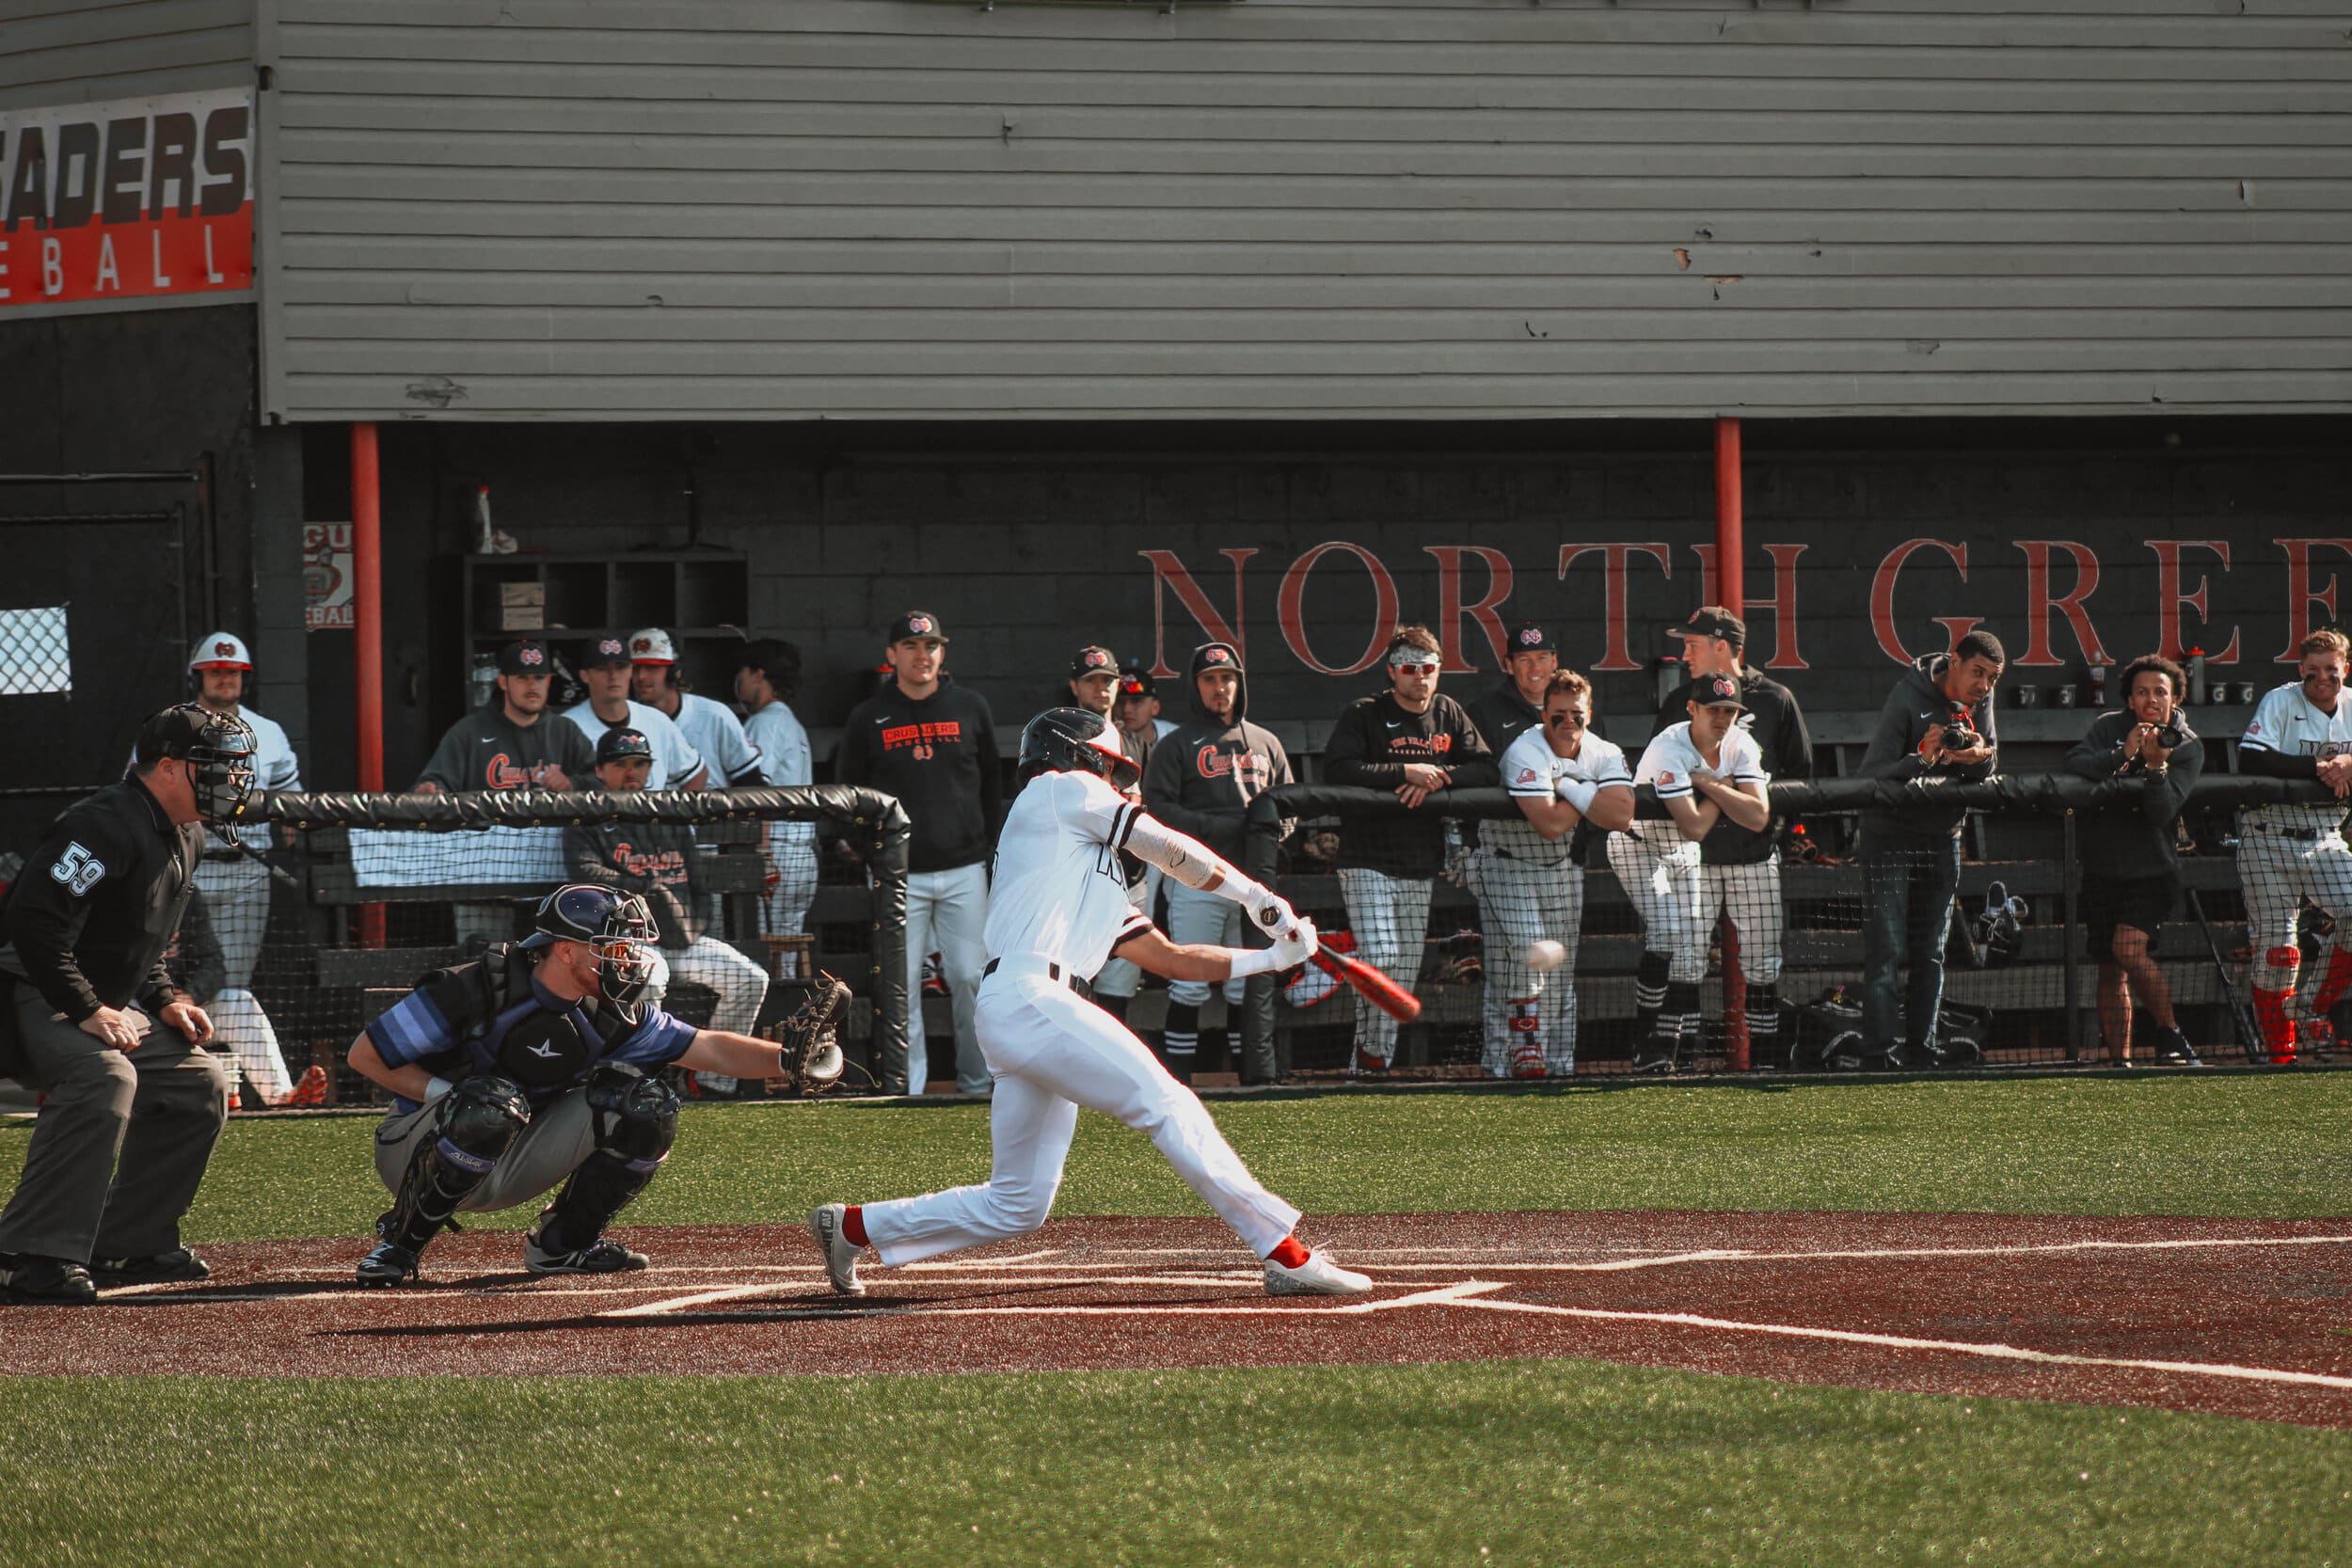 Jeremy Whitehead (8), an NGU junior, swings the bat for a hit.